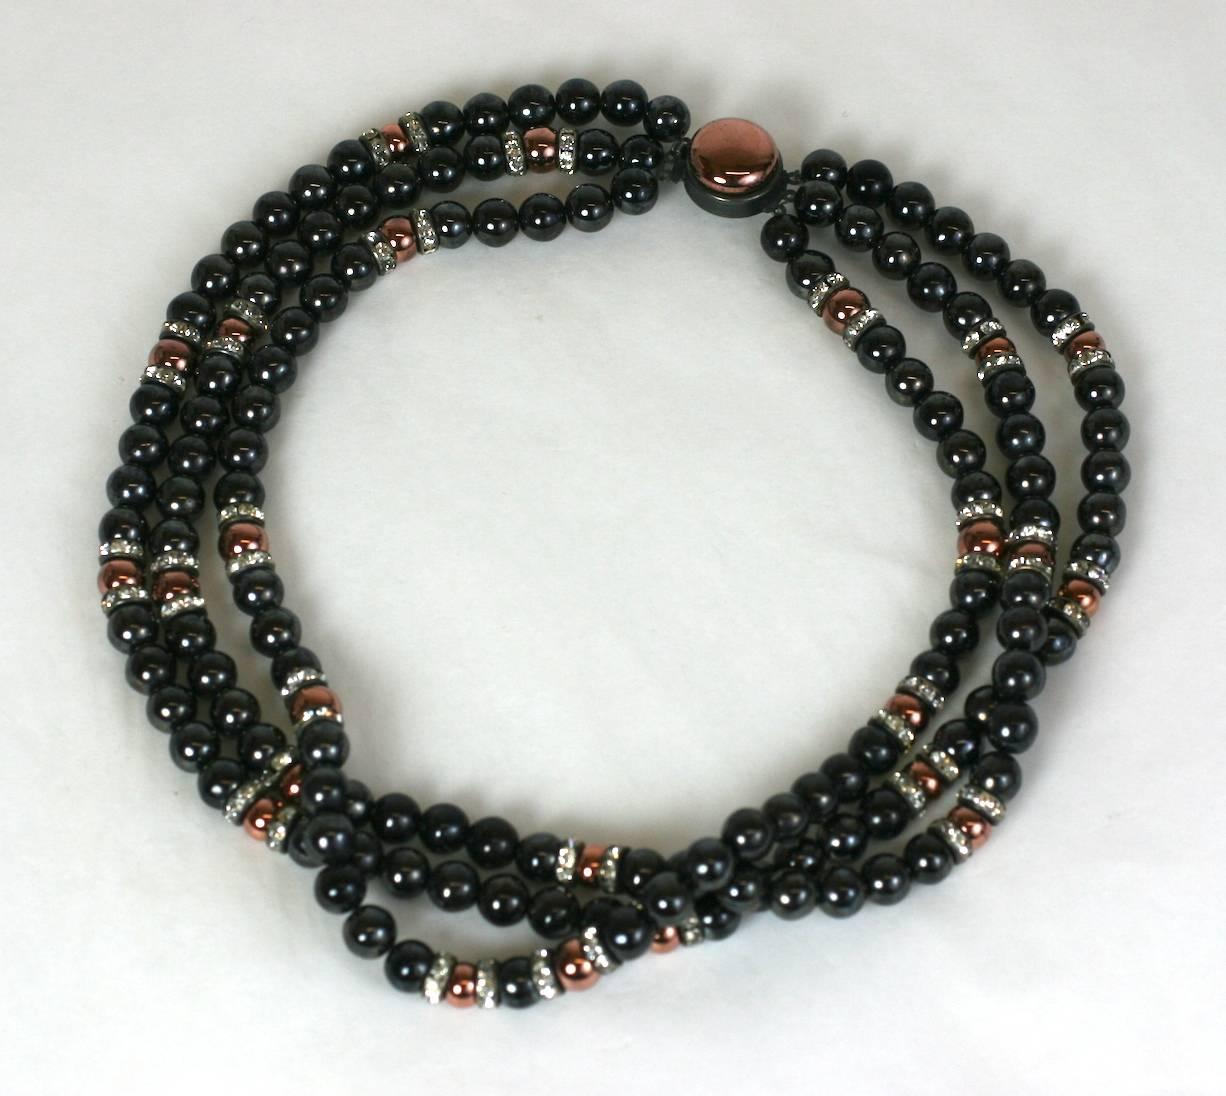 Louis Rousselet three strand faux hematite and copper glass necklace with crystal rondelle accent spacers and cabocheon copper glass clasp. Unusually modern juxtapositions of colors. Made in France. 1930's. 
Excellent Condition
Length 16"
Width